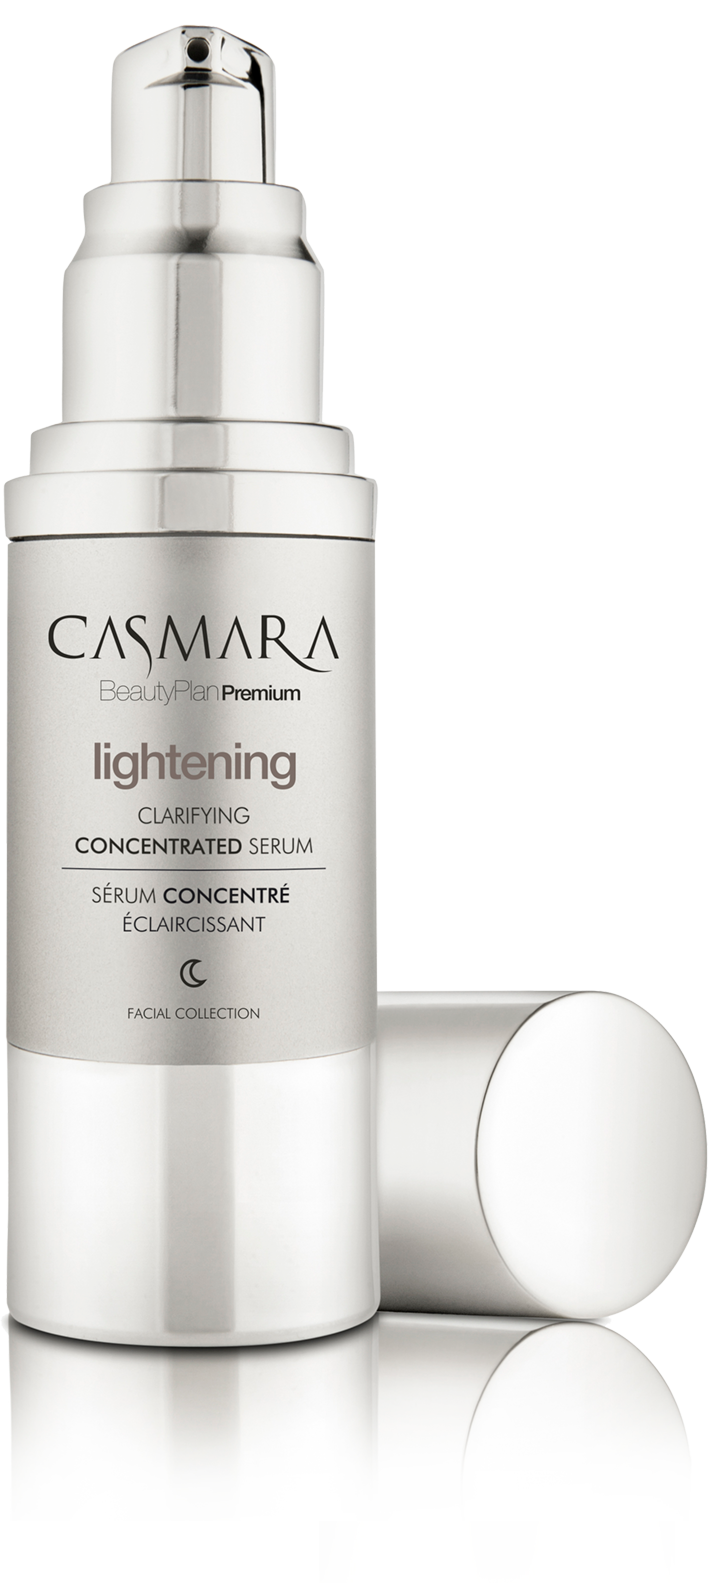 Clarifying Concentrated Serum